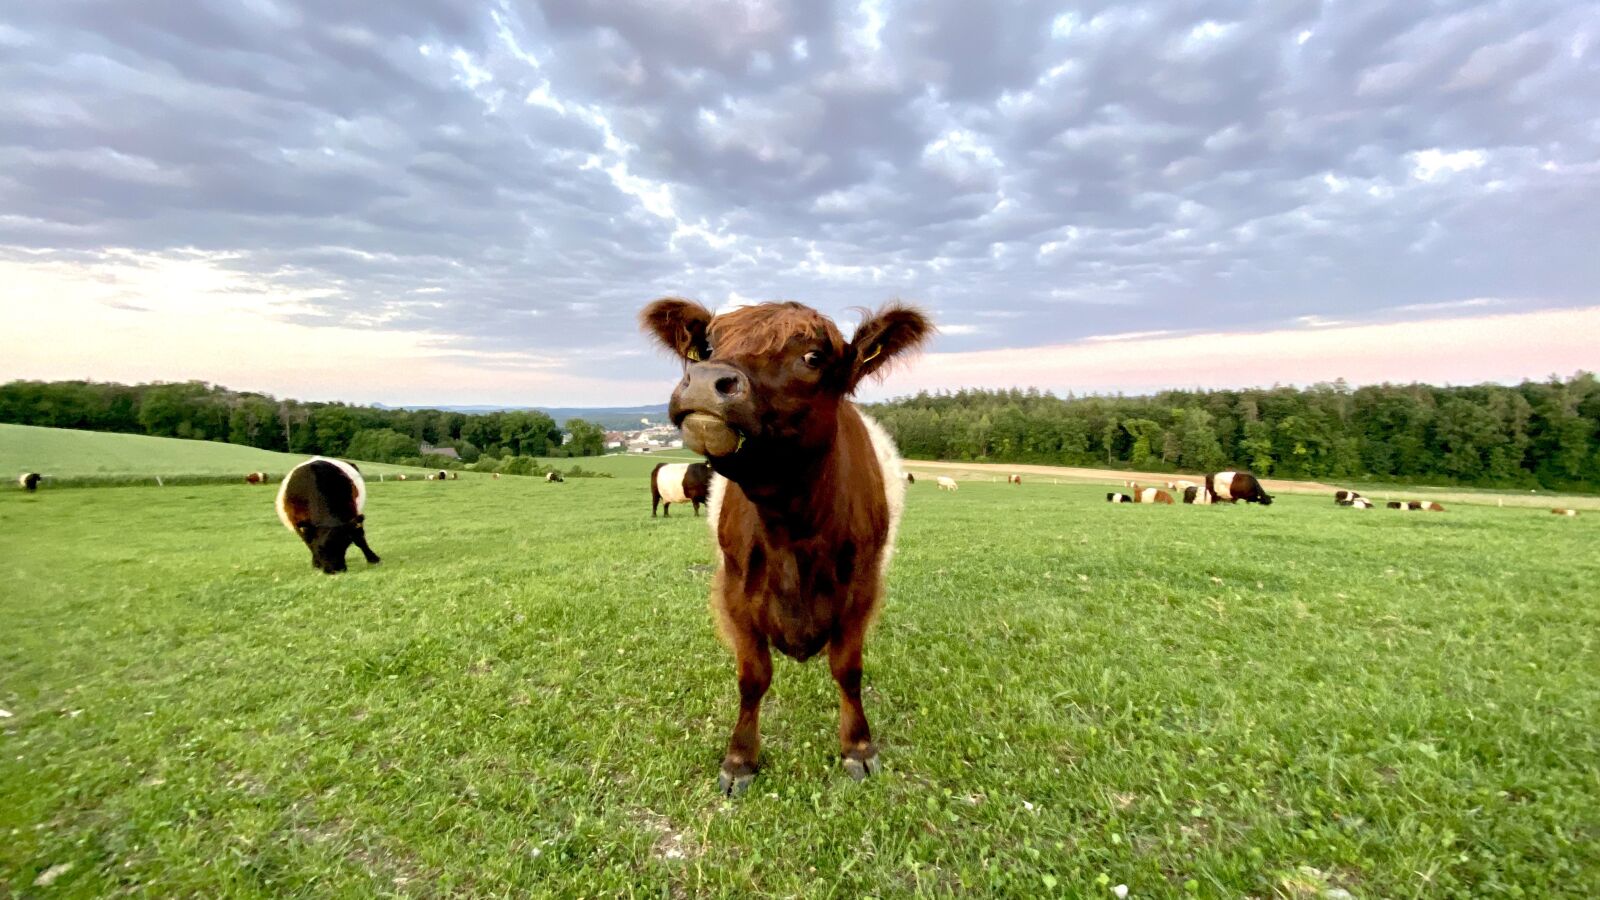 Apple iPhone 11 Pro + iPhone 11 Pro back triple camera 1.54mm f/2.4 sample photo. Cow, galloway, animal photography